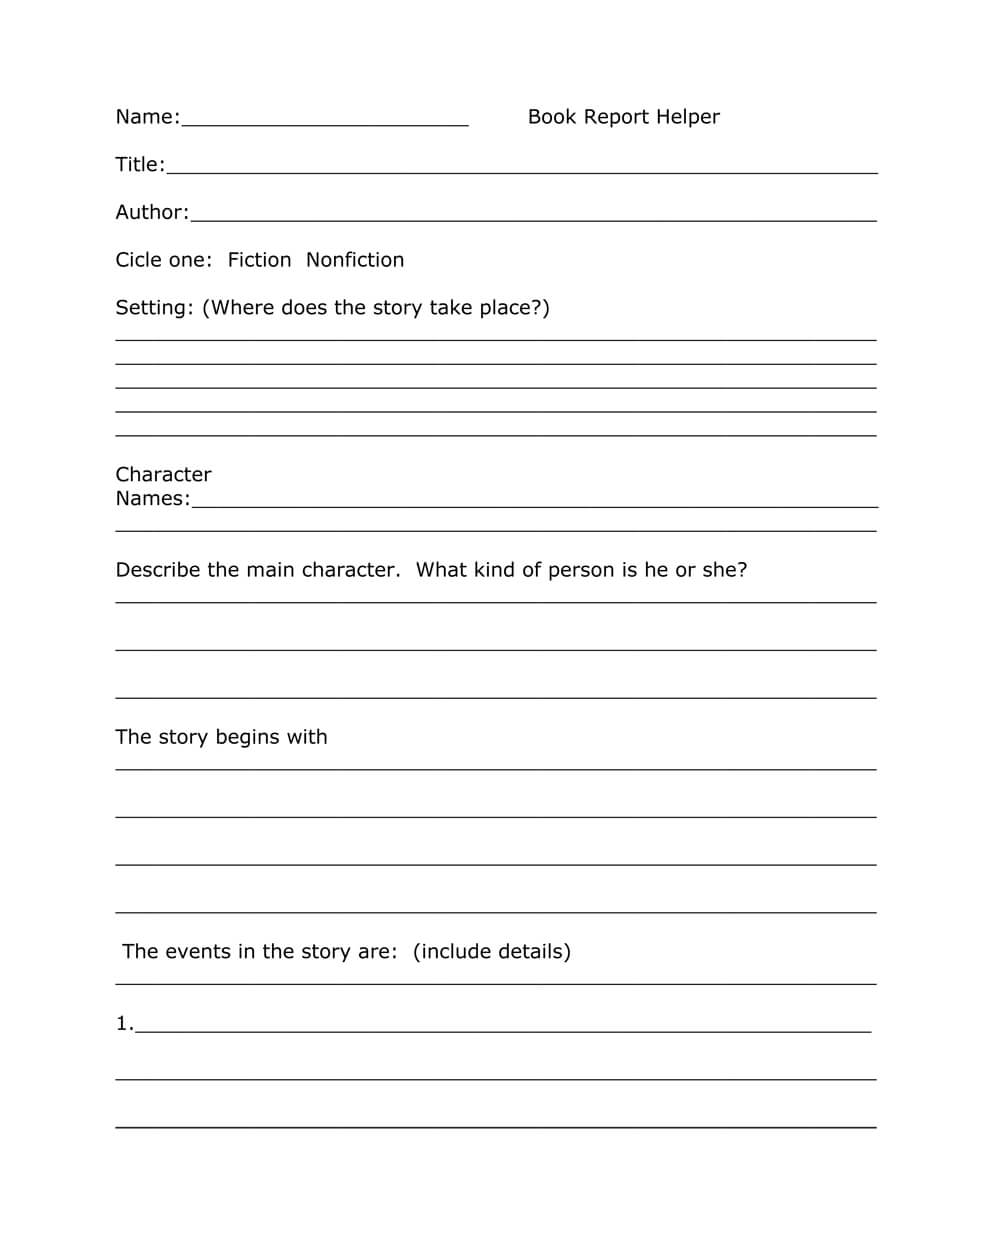 Book Report Templates From Custom Writing Service For Story Report Template